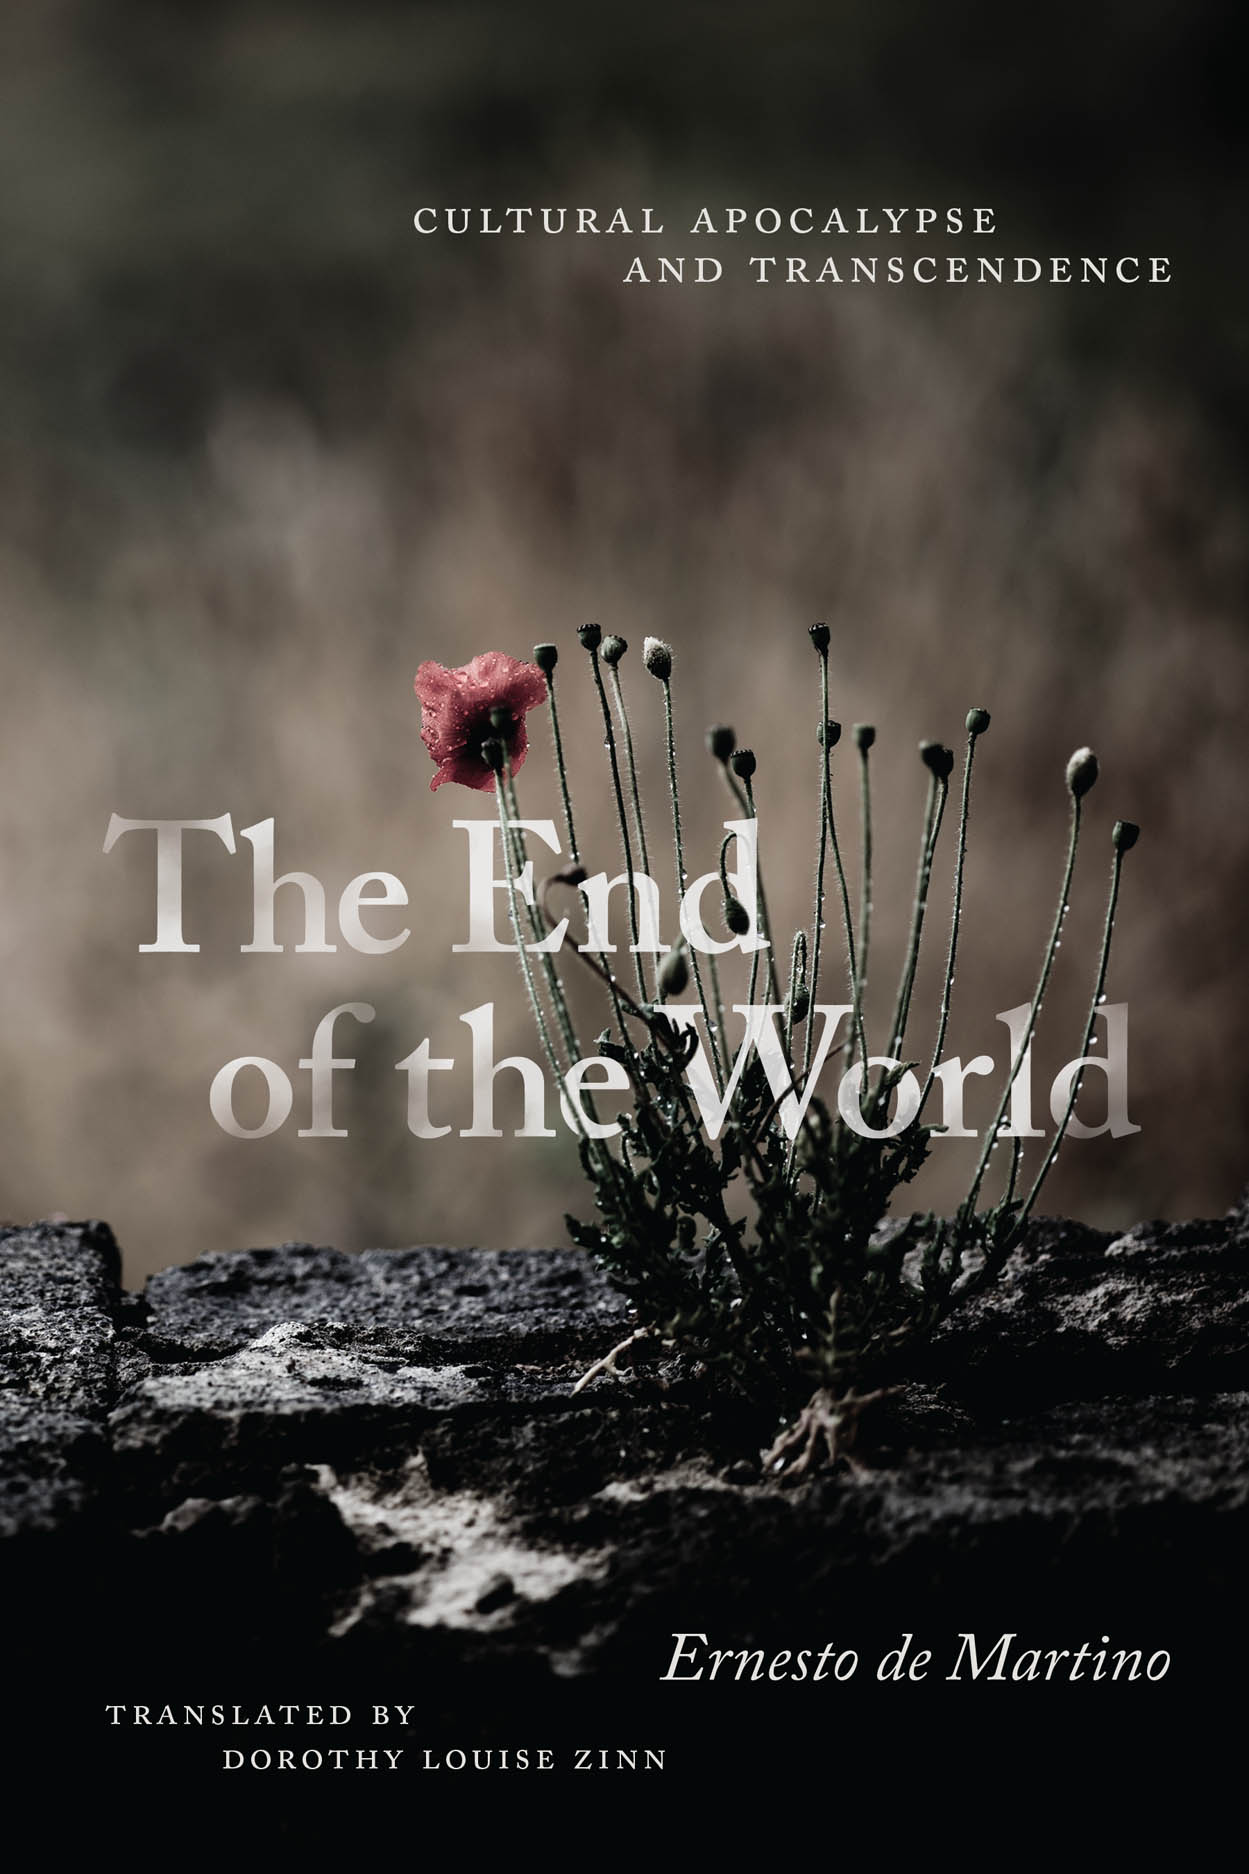 The End of the World: Cultural Apocalypse and Transcendence, de Martino,  Zinn